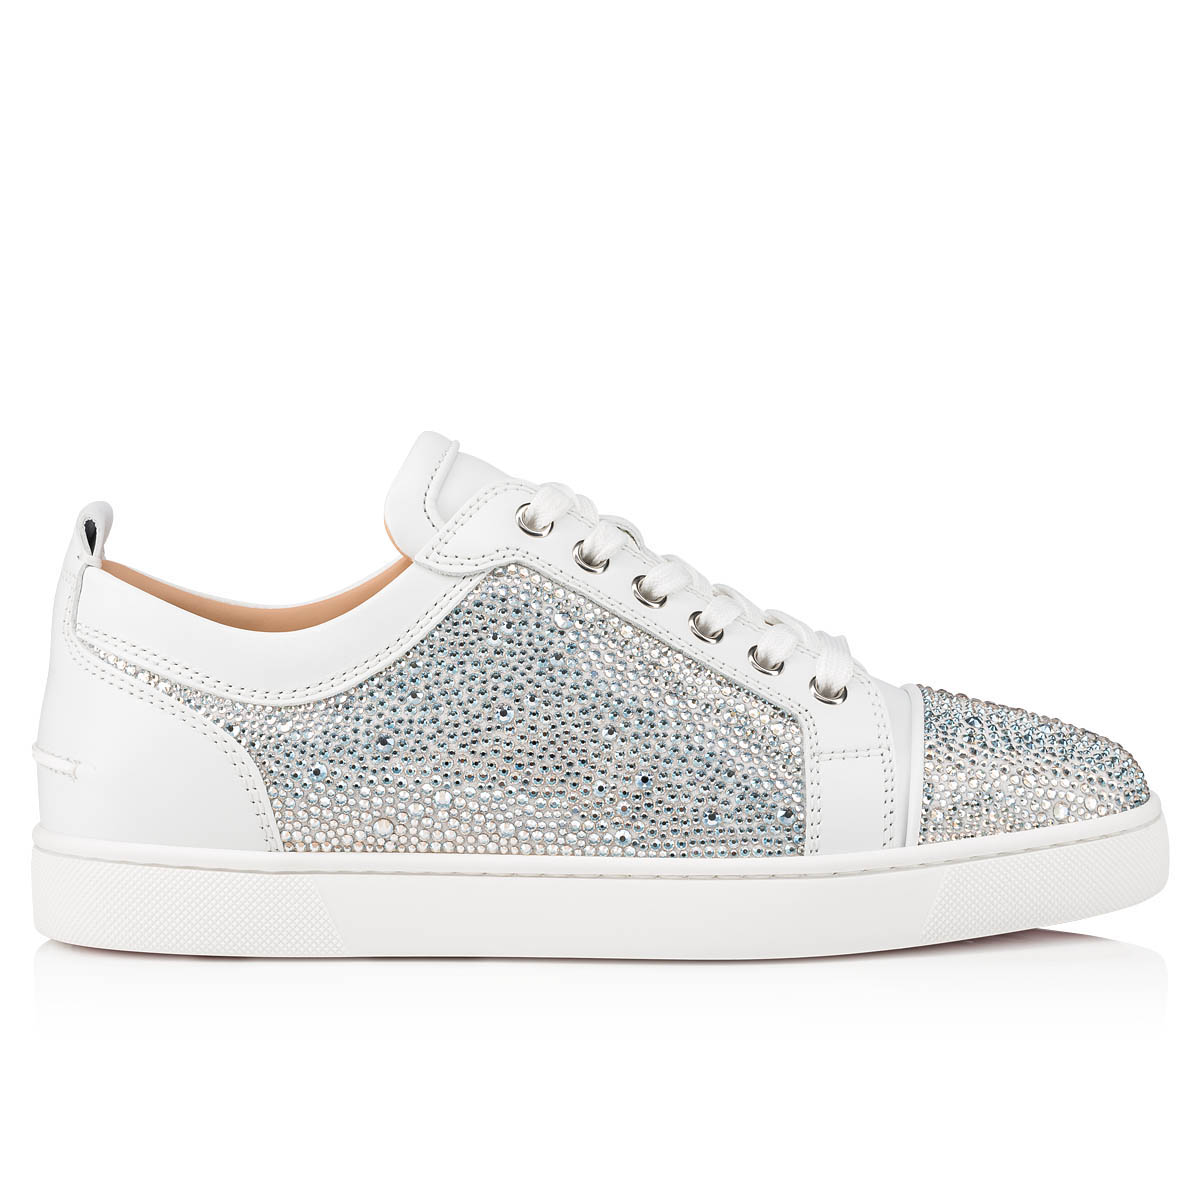 Christian Louboutin Blue Suede Louis Junior Strass Low Top